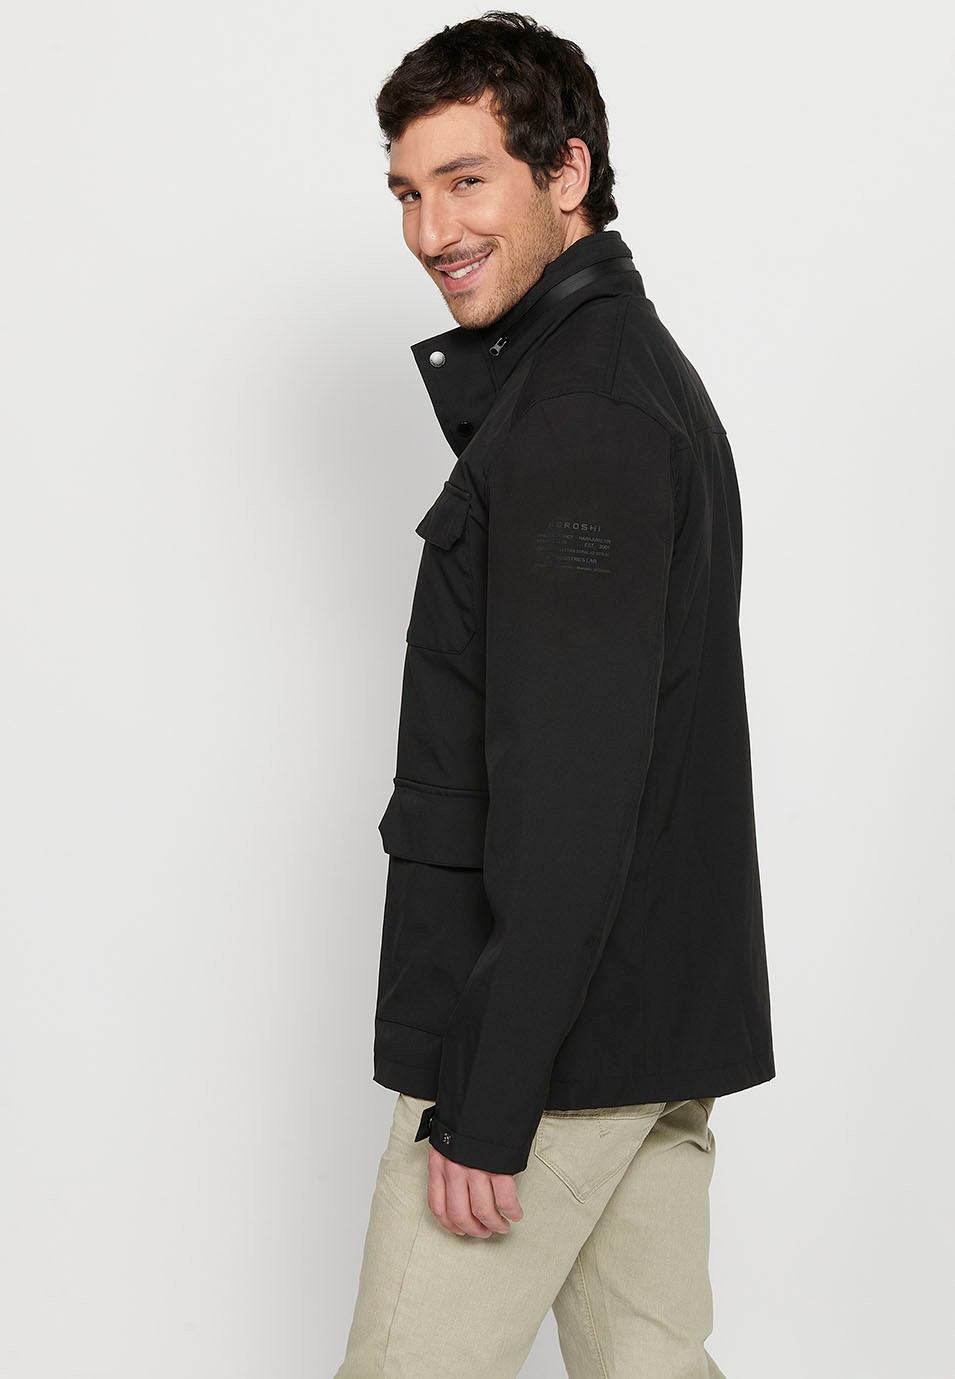 Long Black High Neck Windbreaker Jacket with Front Zipper Closure and Four Flap Pockets for Men 8